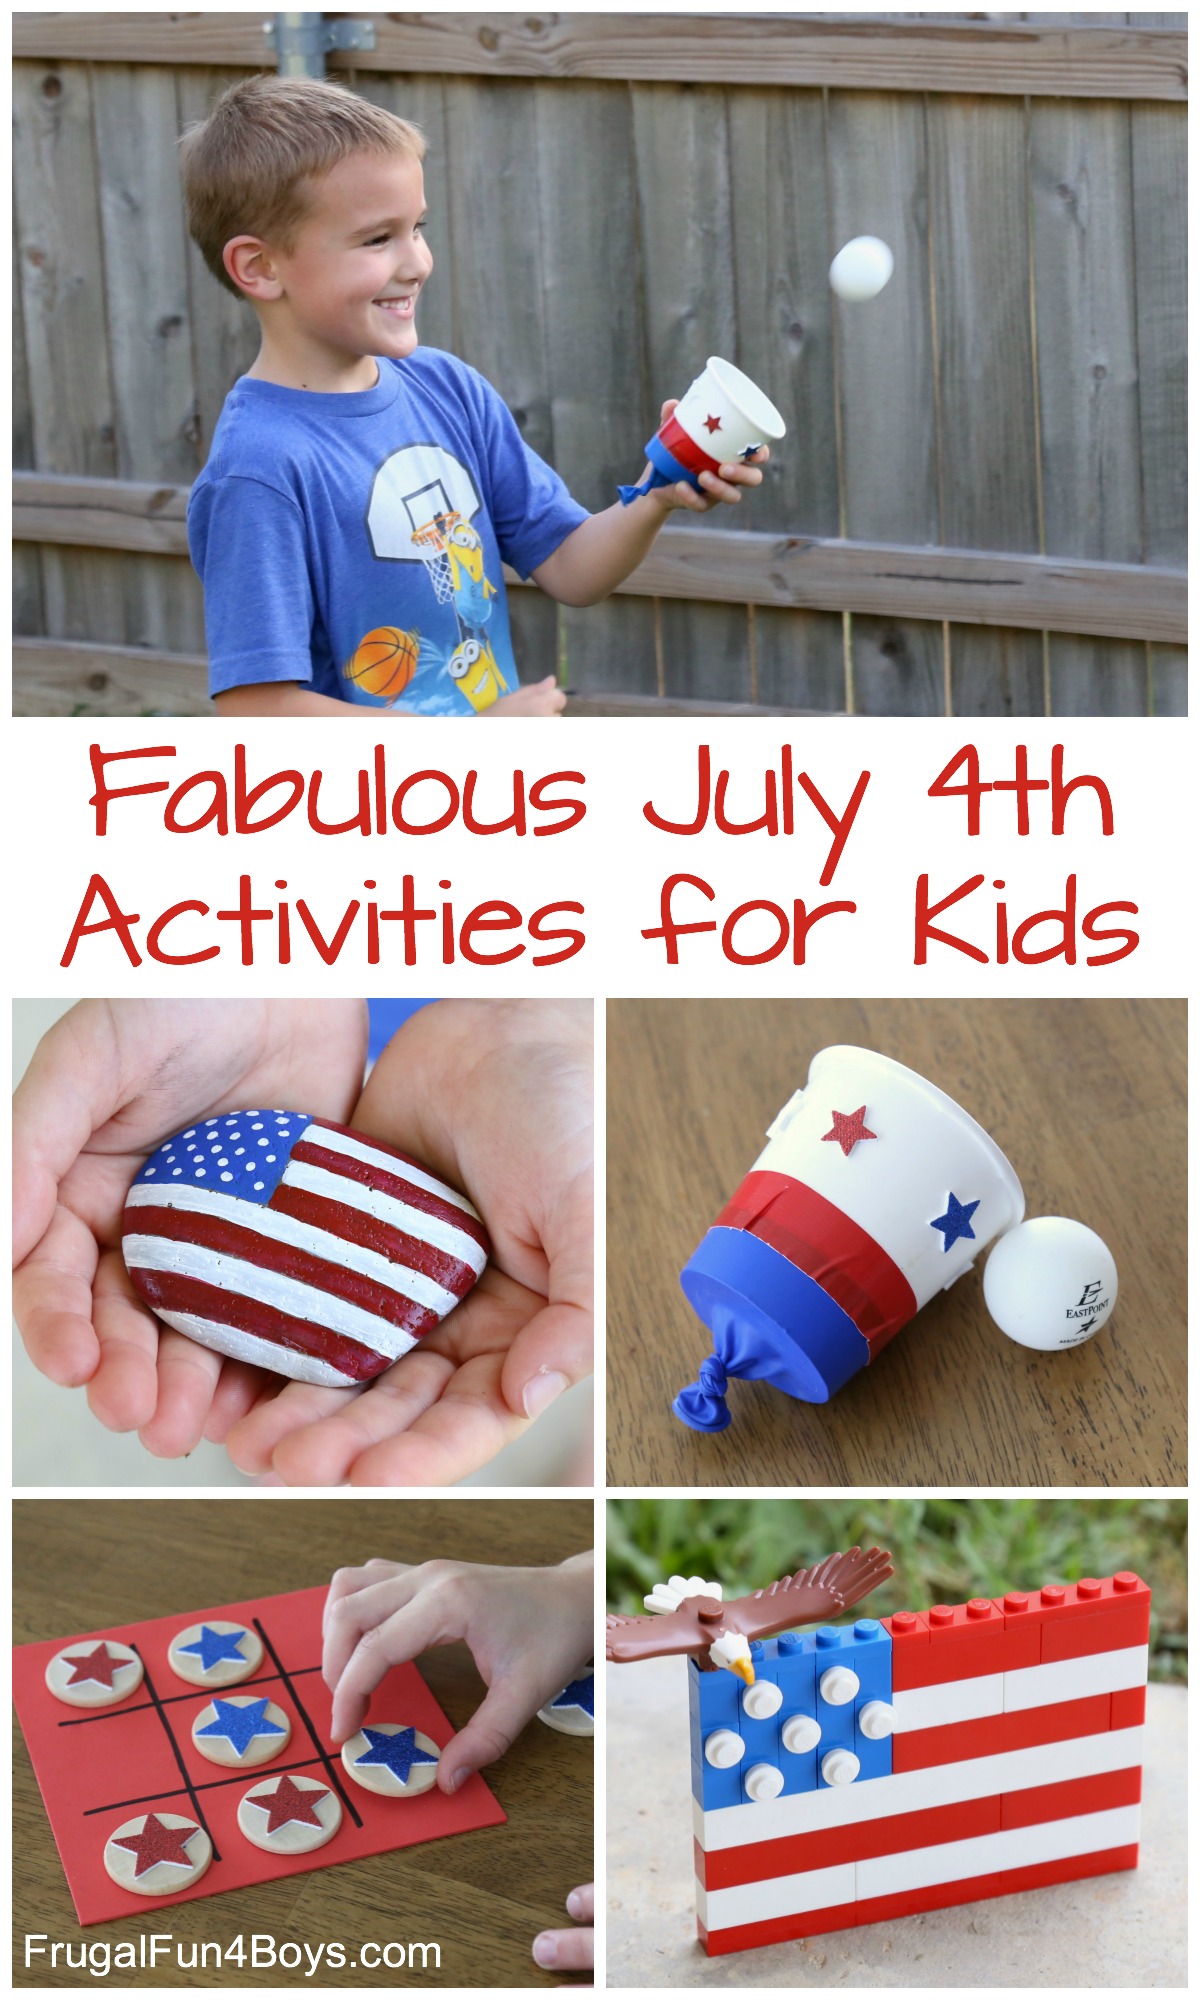 Let's Celebrate 4th of July with these Fun Games!